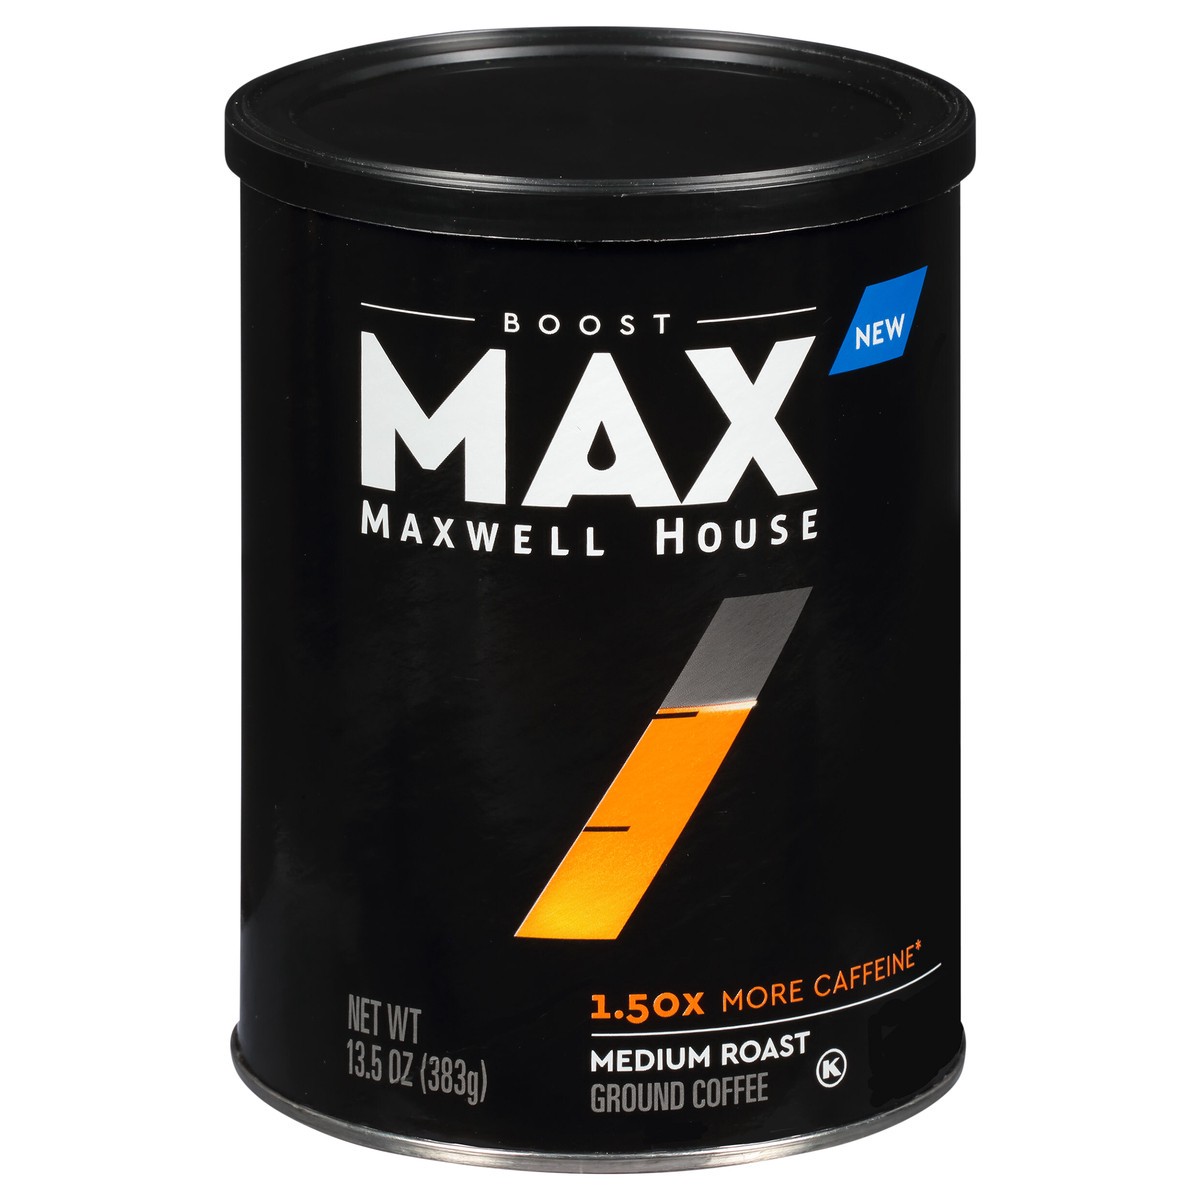 slide 1 of 7, Maxwell House Max Boost Medium Roast Ground Coffee with 1.50X More Caffeine, 13.5 oz Canister, 13.5 oz